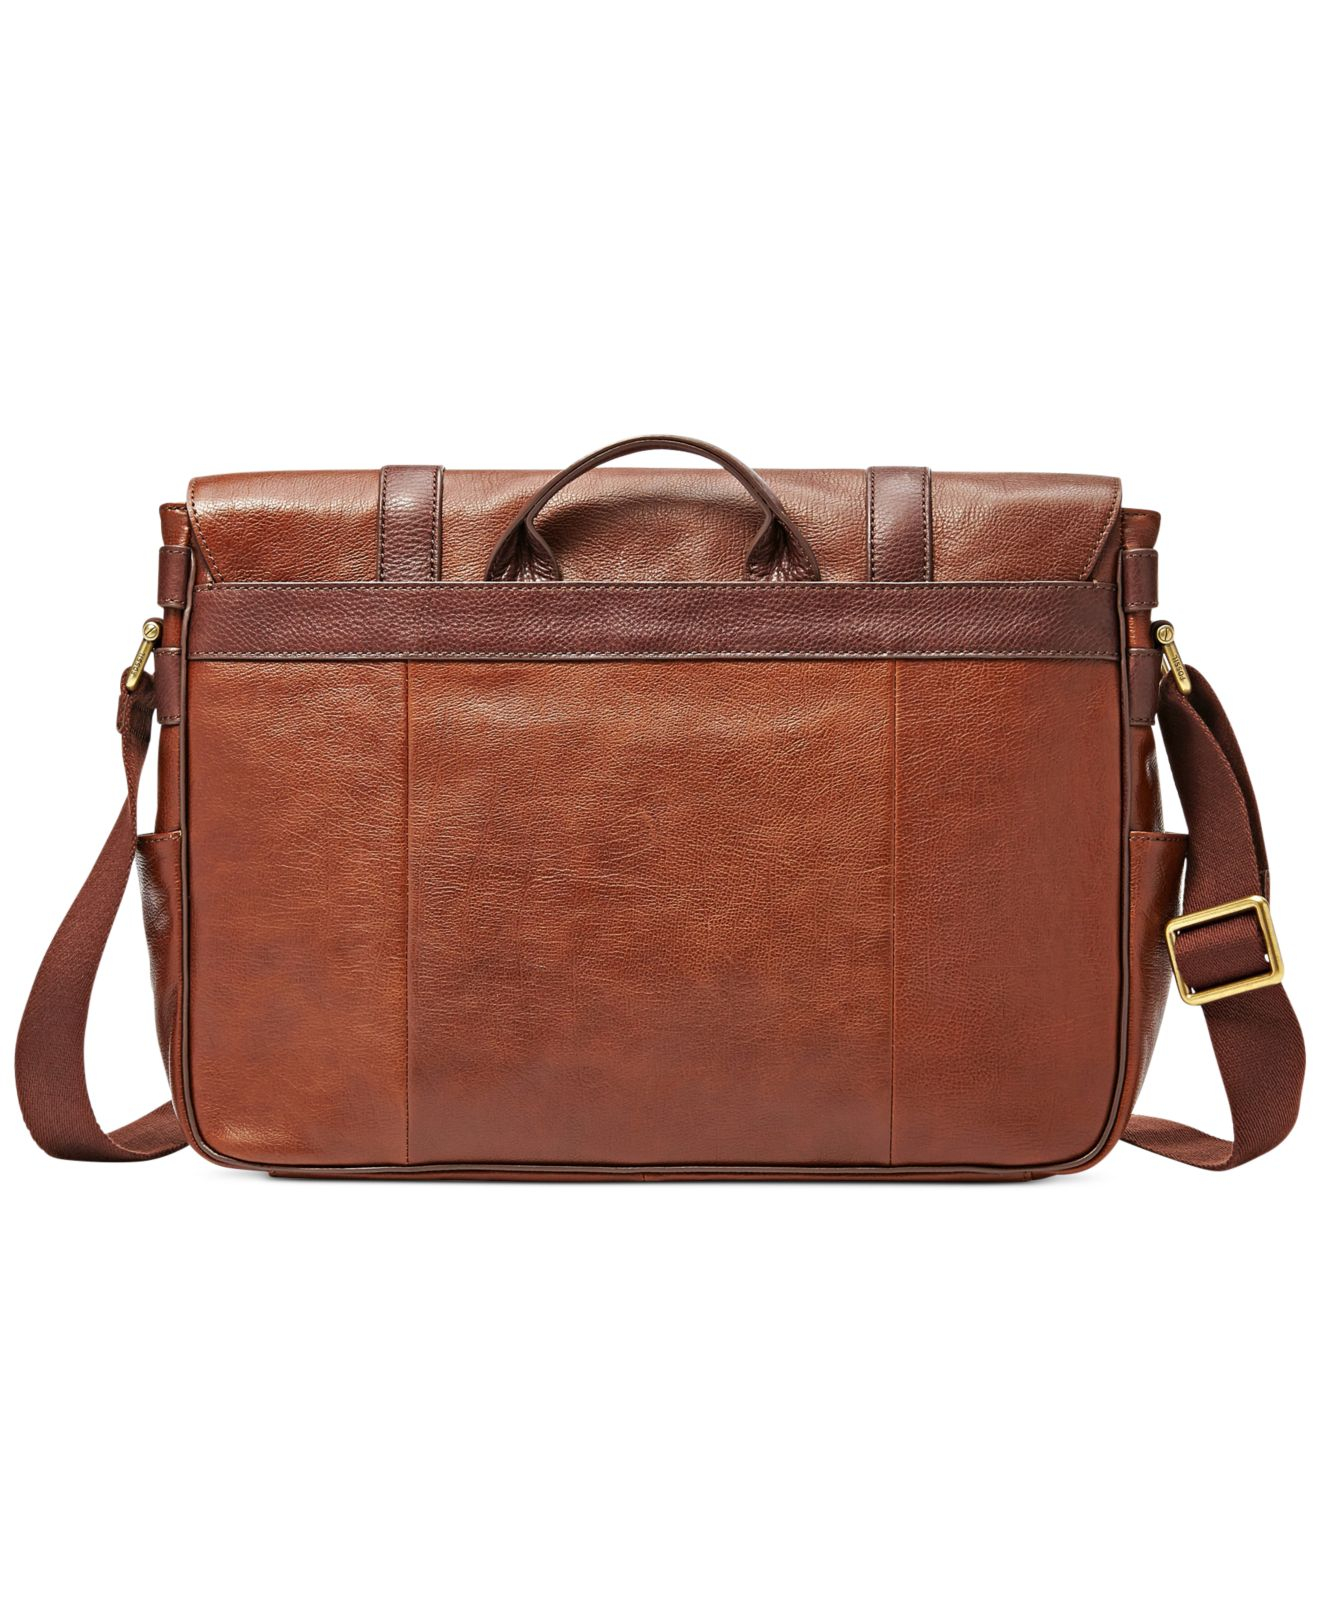 Fossil Mens Messenger Bags | IUCN Water